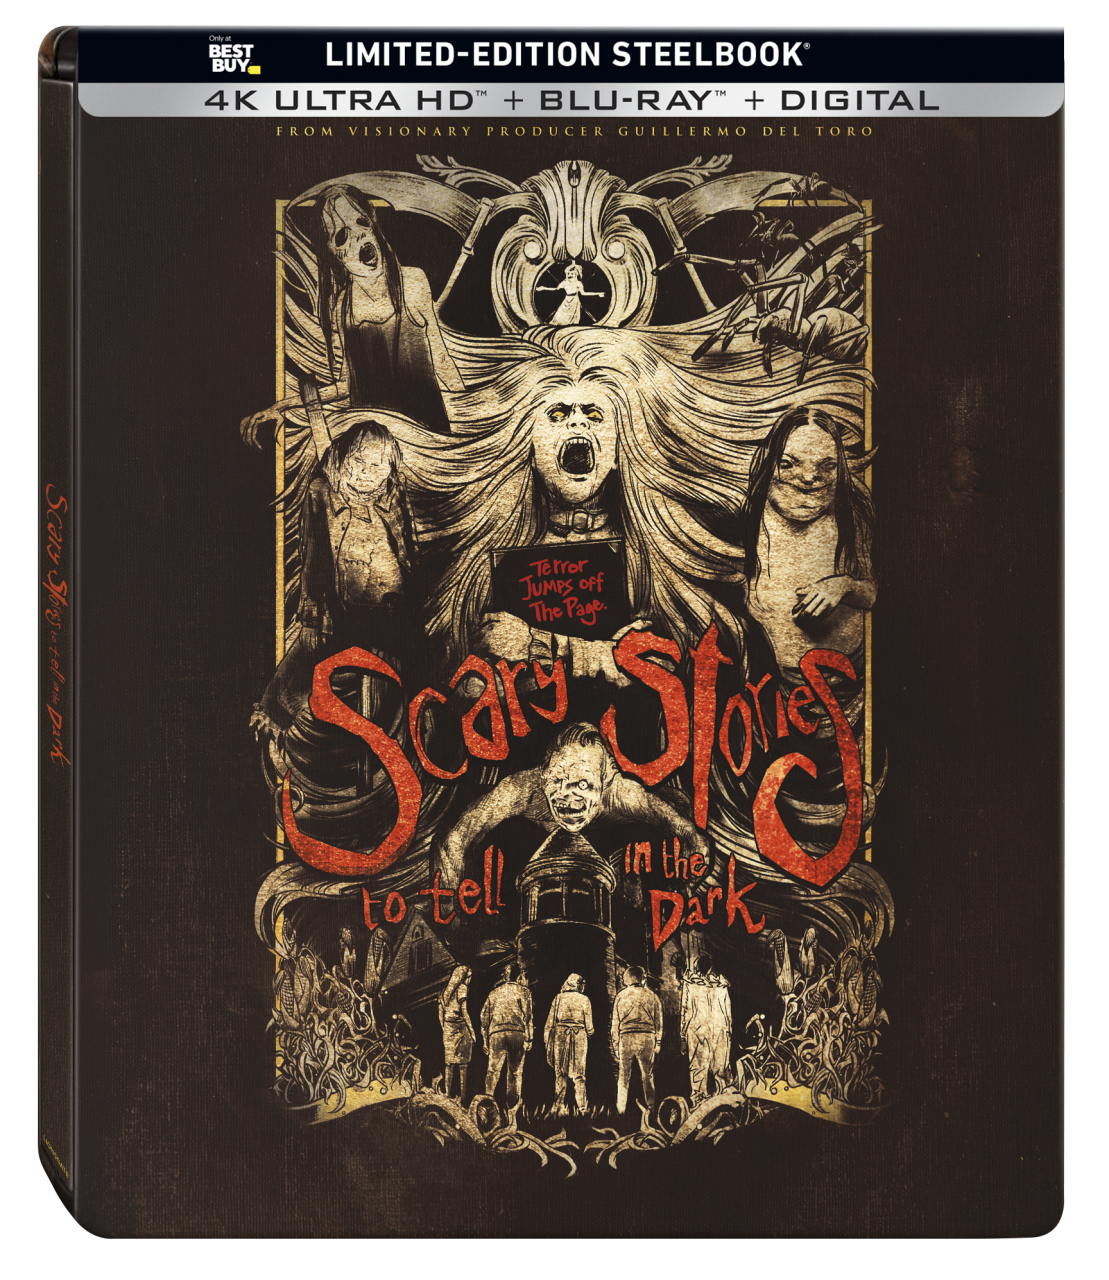 Scary Stories To Tell In The Dark 4K Ultra HD Best Buy Steelbook Combo Pack cover (Lionsgate Home Entertainment)